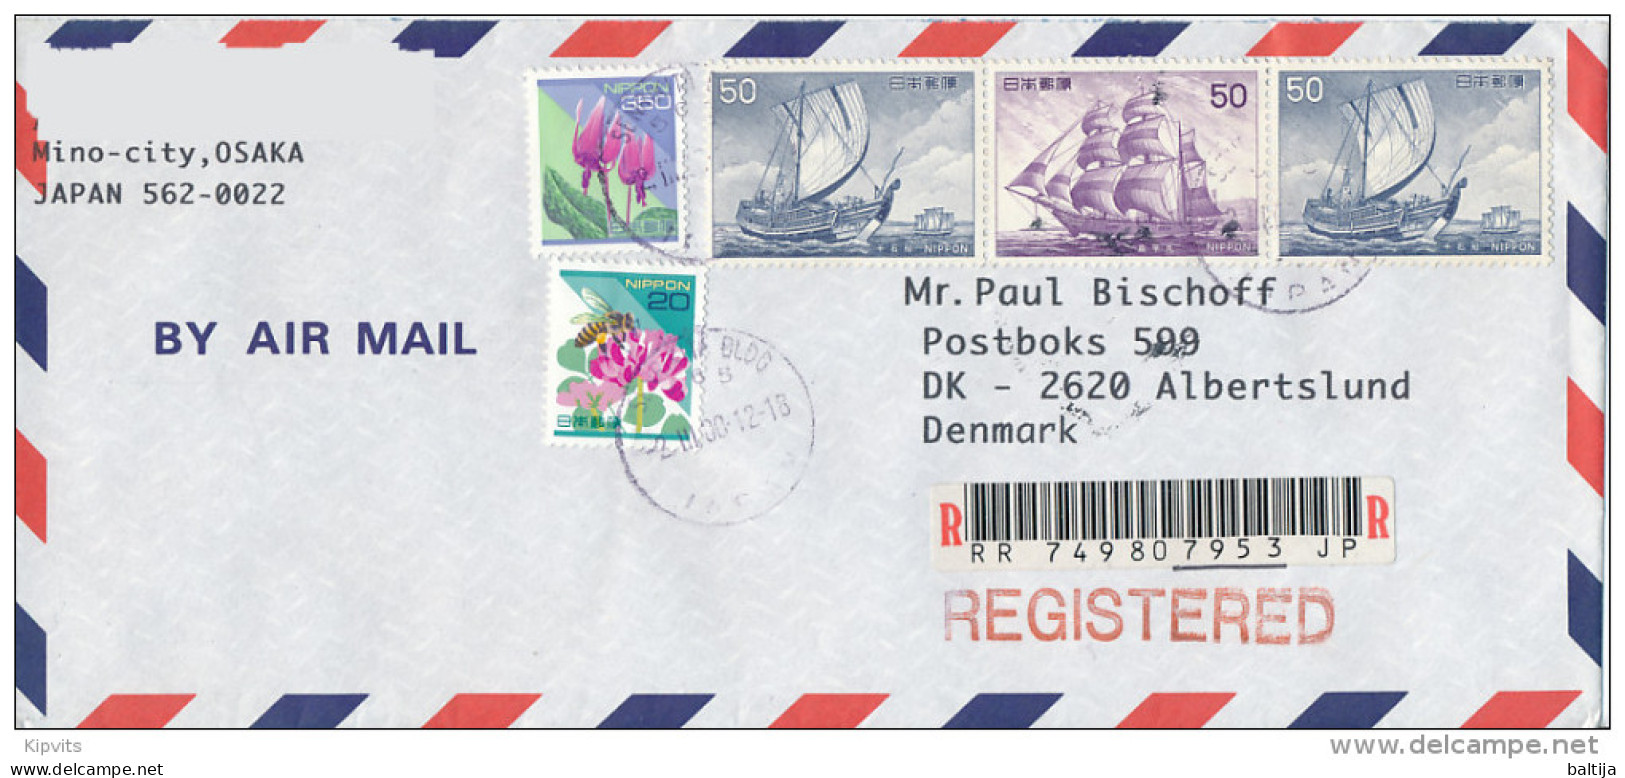 Registered Airmail Cover Abroad - 2 March 2000 - Covers & Documents